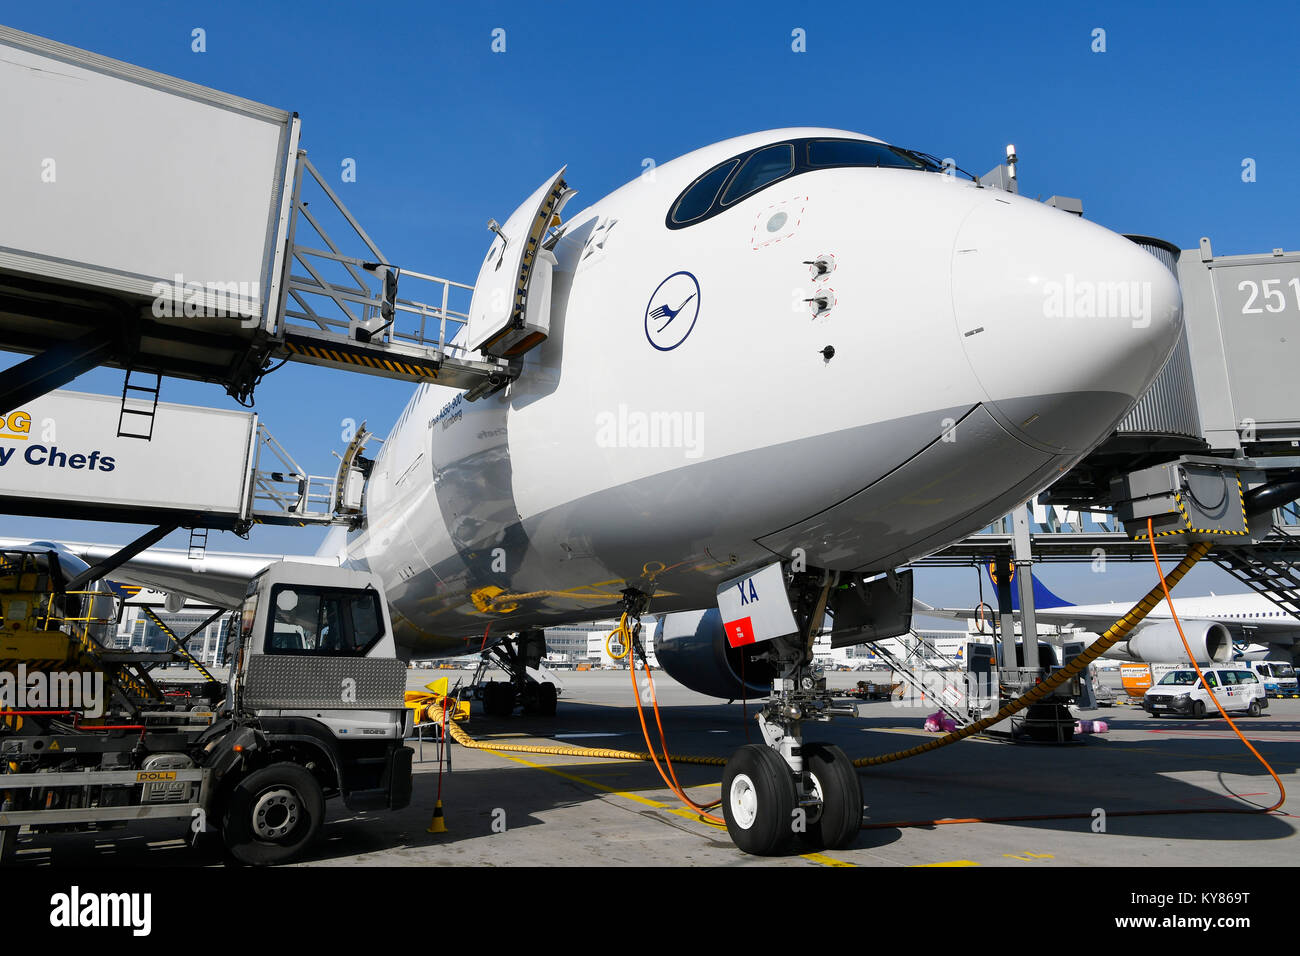 Lufthansa, Airbus, A350-900, aircraft, airplane, plane, airlines, airways, roll, in, out,  take of, start, Push, Ramp, Munich Airport, Stock Photo